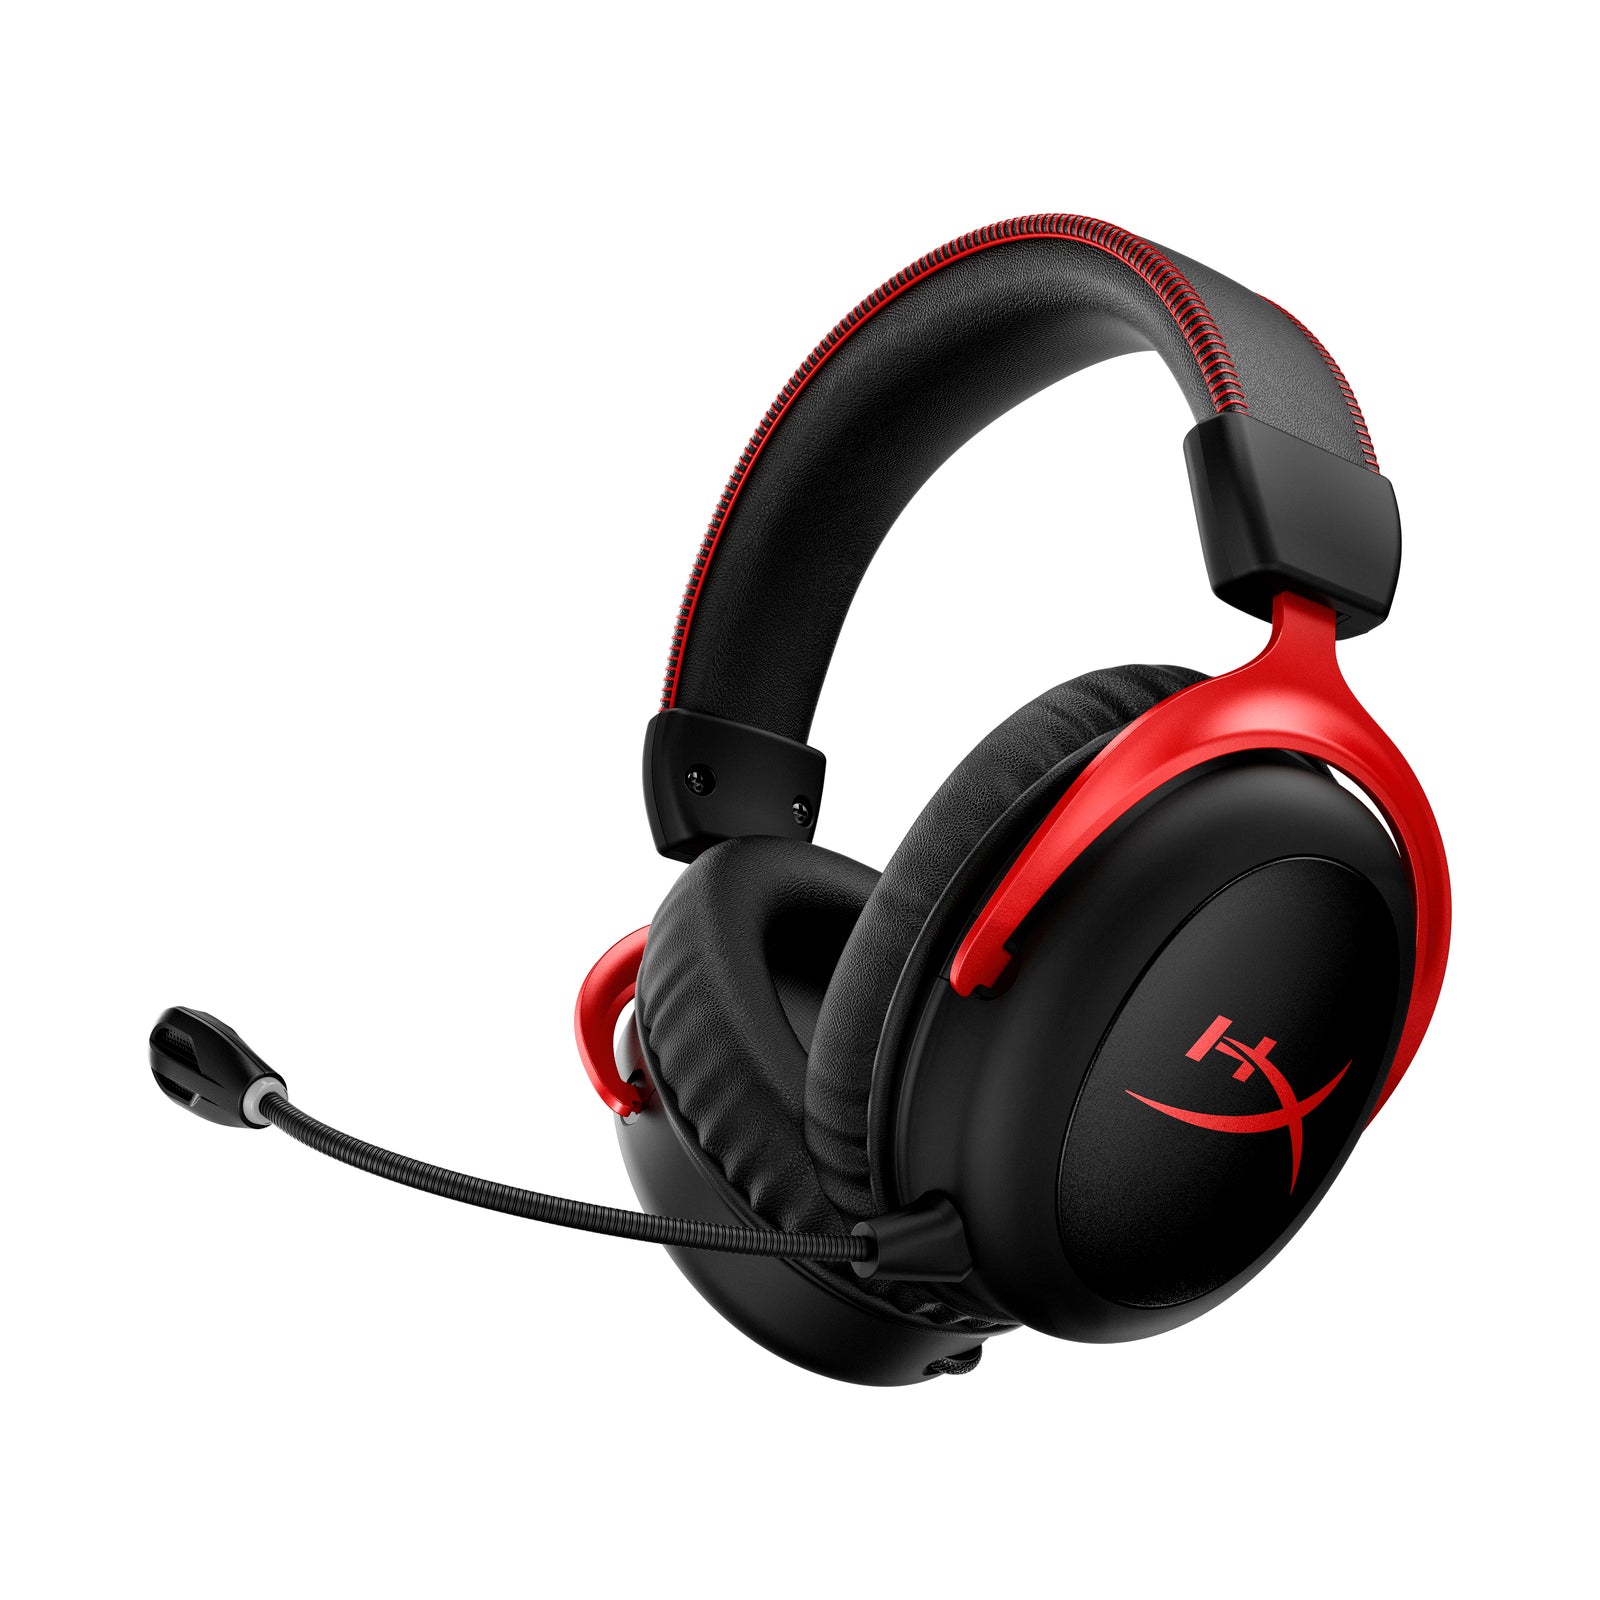  HyperX Cloud II Gaming Headset - 7.1 Surround Sound - Memory  Foam Ear Pads - Durable Aluminum Frame - Works with PC, PS4, PS4 PRO, Xbox  One, Xbox One S 